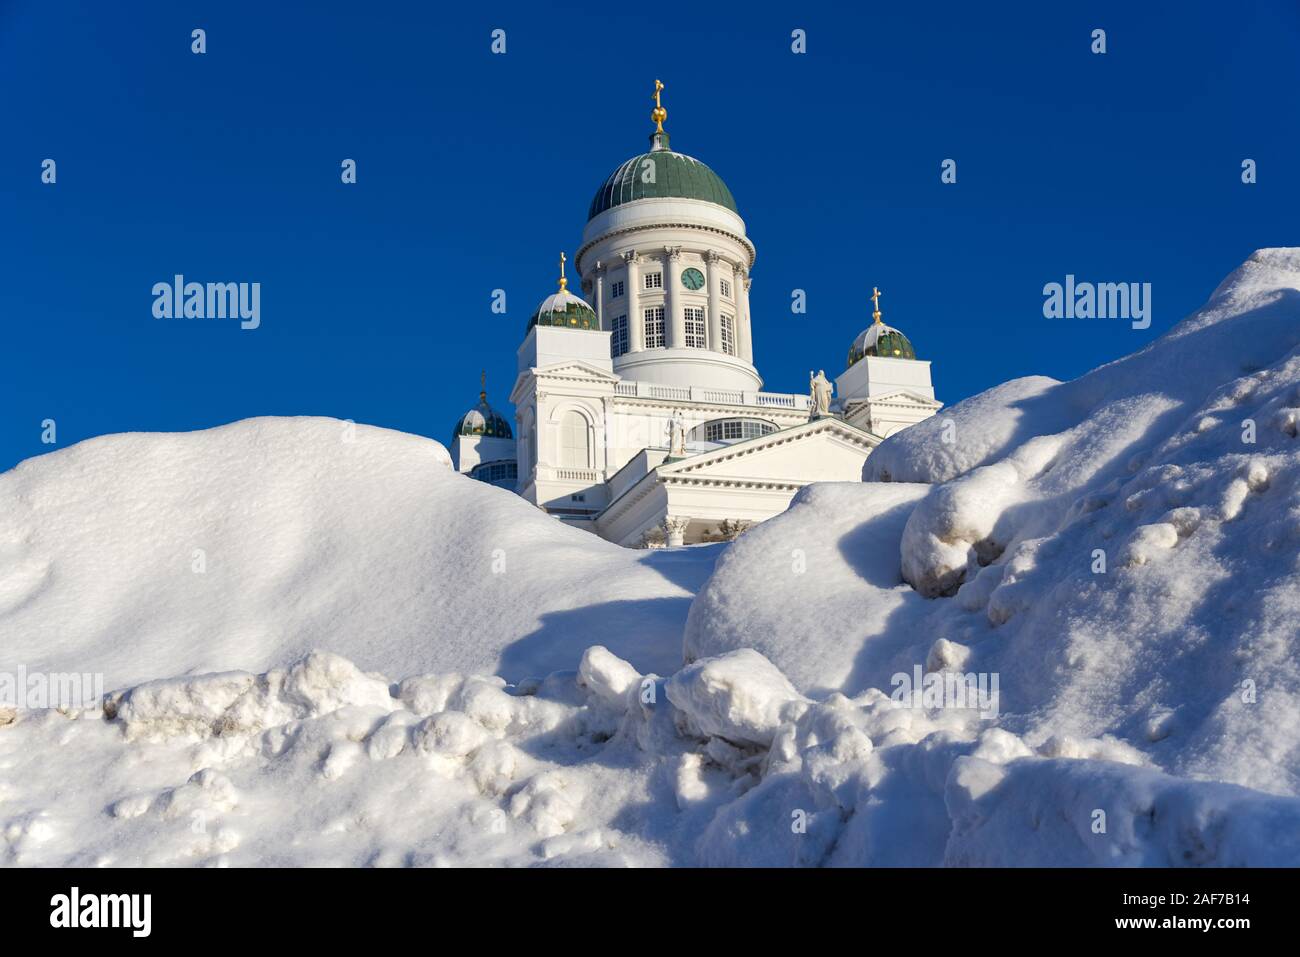 https://c8.alamy.com/comp/2AF7B14/helsinki-finland-february-6-2019-helsinki-cathedral-behind-huge-pile-of-snow-on-a-sunny-and-cold-winter-afternoon-after-weeks-of-heavy-snowfall-2AF7B14.jpg